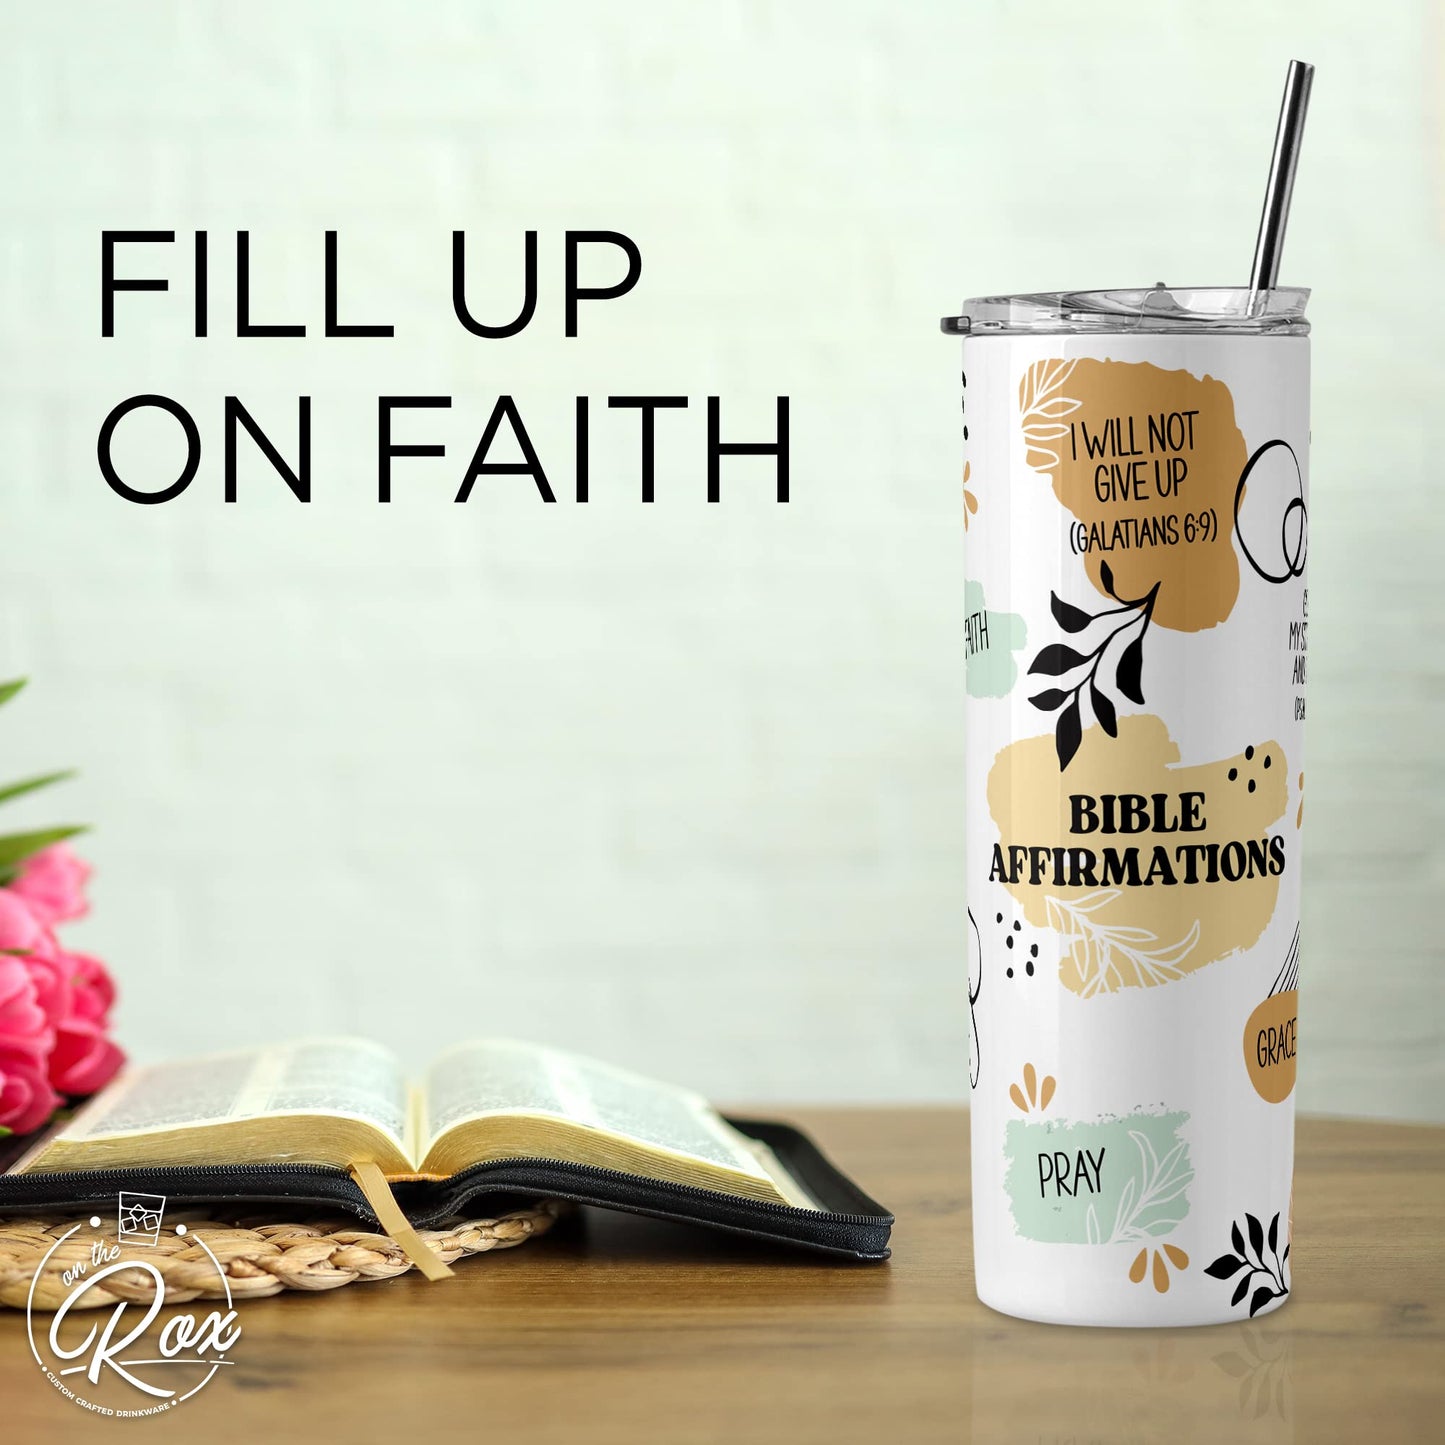 On The Rox Drinks Christian Gifts for Women - Inspirational Religious Gifts For Women Of Faith, Scripture Gifts For Sisters - 1PC 20oz Stainless Steel Printed Tumbler and Straw, Faith Based Quotes